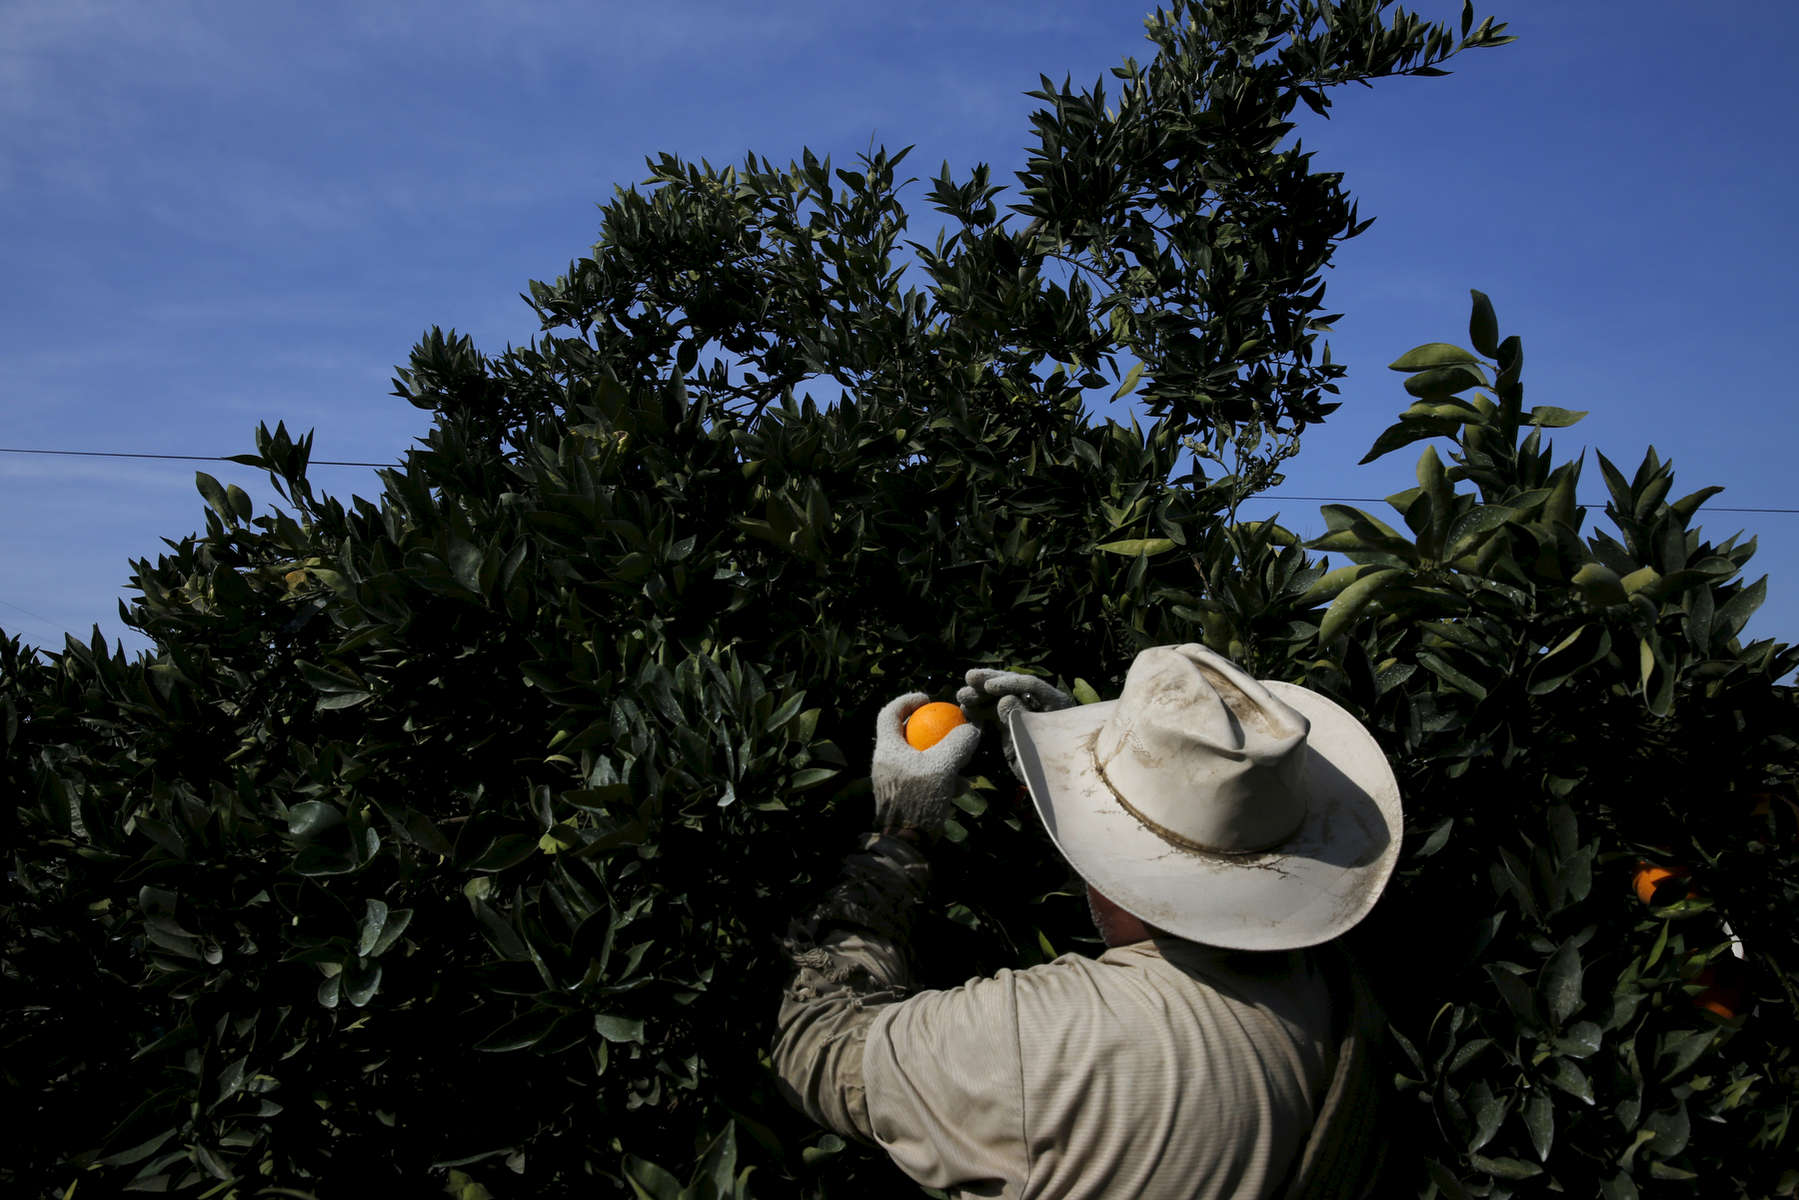 Esteban de Santiago harvests oranges in a Washington Navel orange orchard Feb. 14, 2015 in Exeter, Calif. As California enters into the fourth year of drought and farmers lose orchards and fallow fields, migrant worker jobs are becoming more scarce.